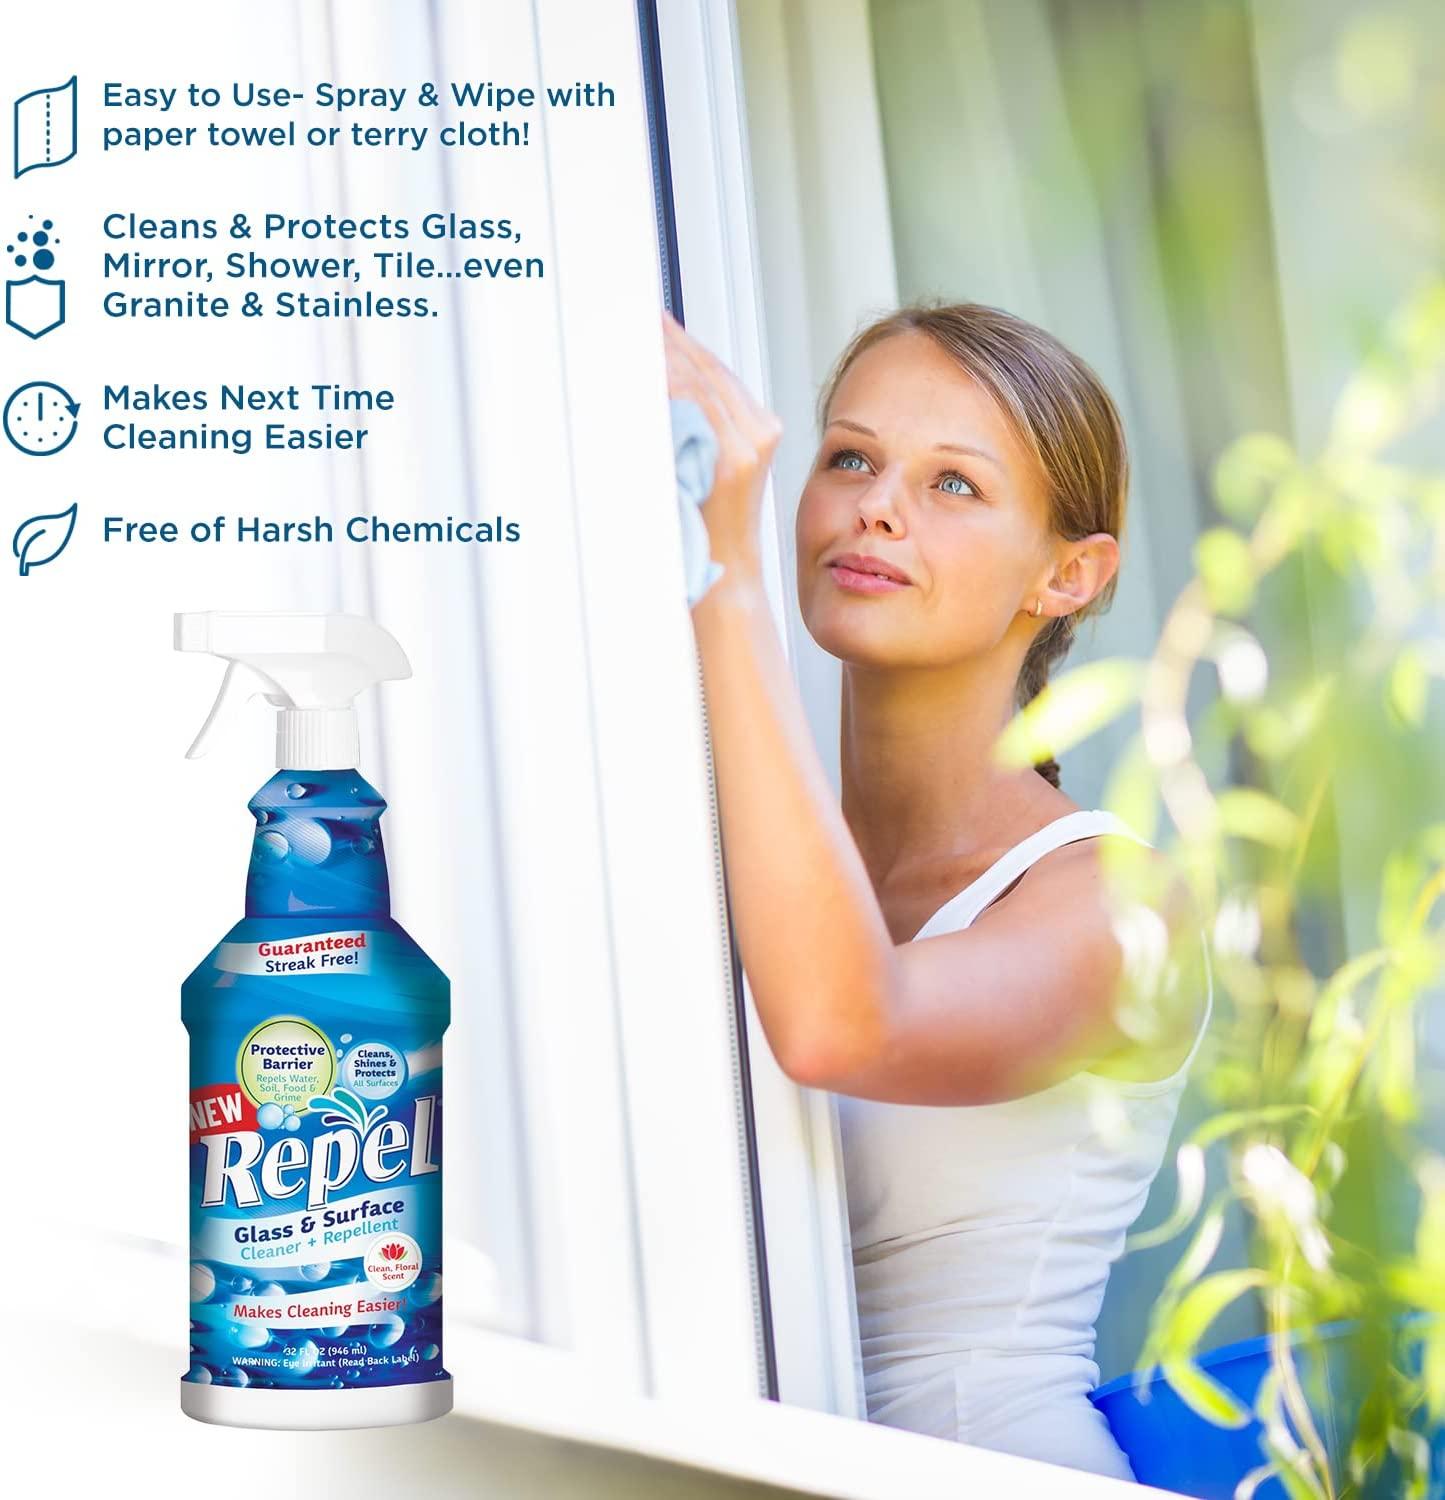 REPEL Glass & Surface Cleaner 32 fl. oz. - Cleans & Repels water